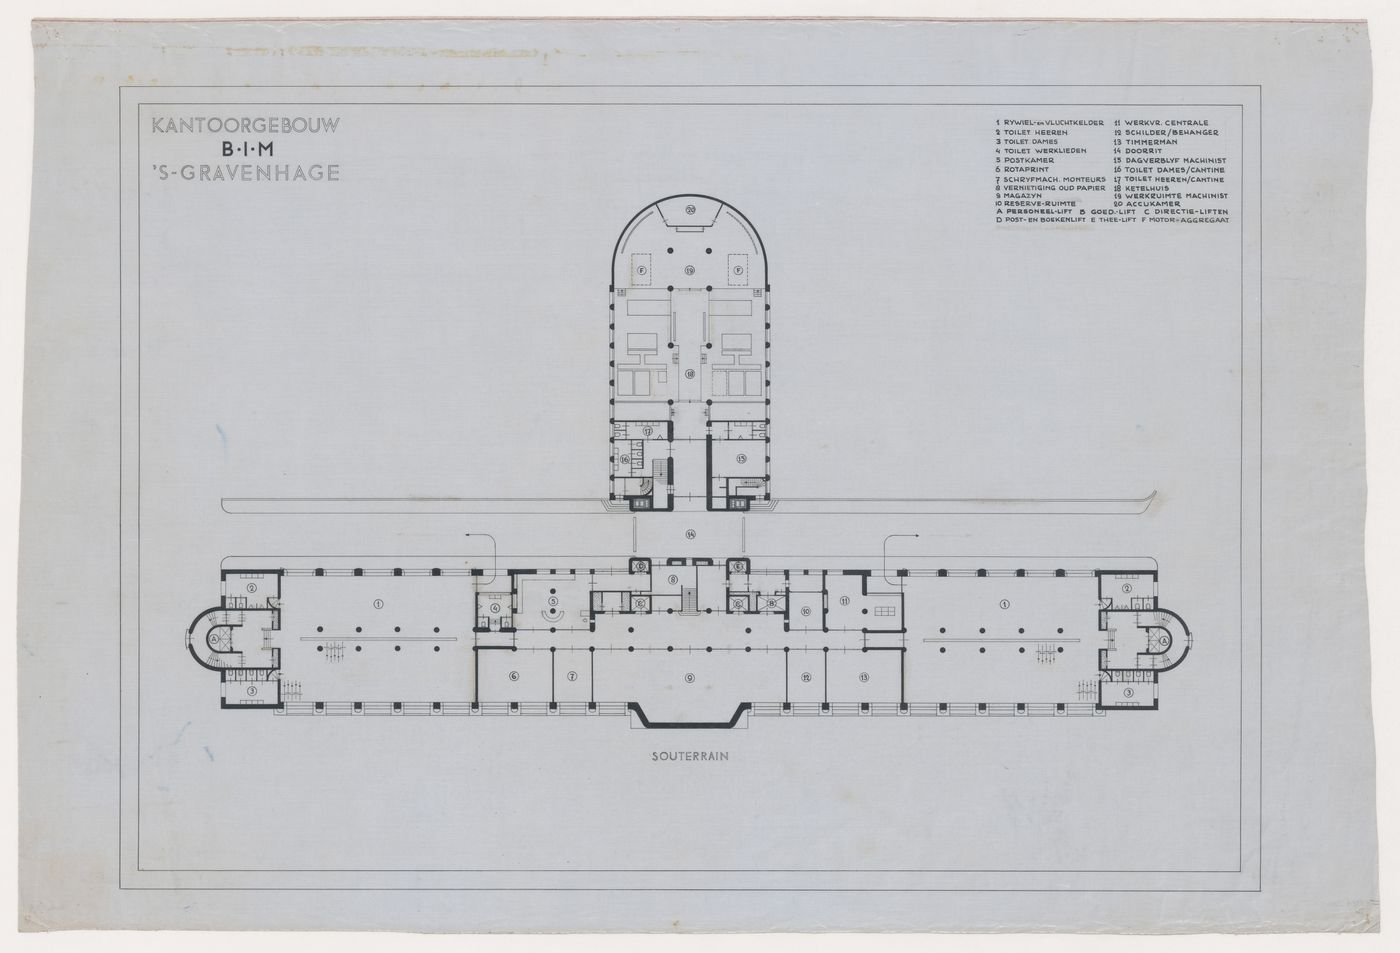 Basement plan for the Shell Building, The Hague, Netherlands